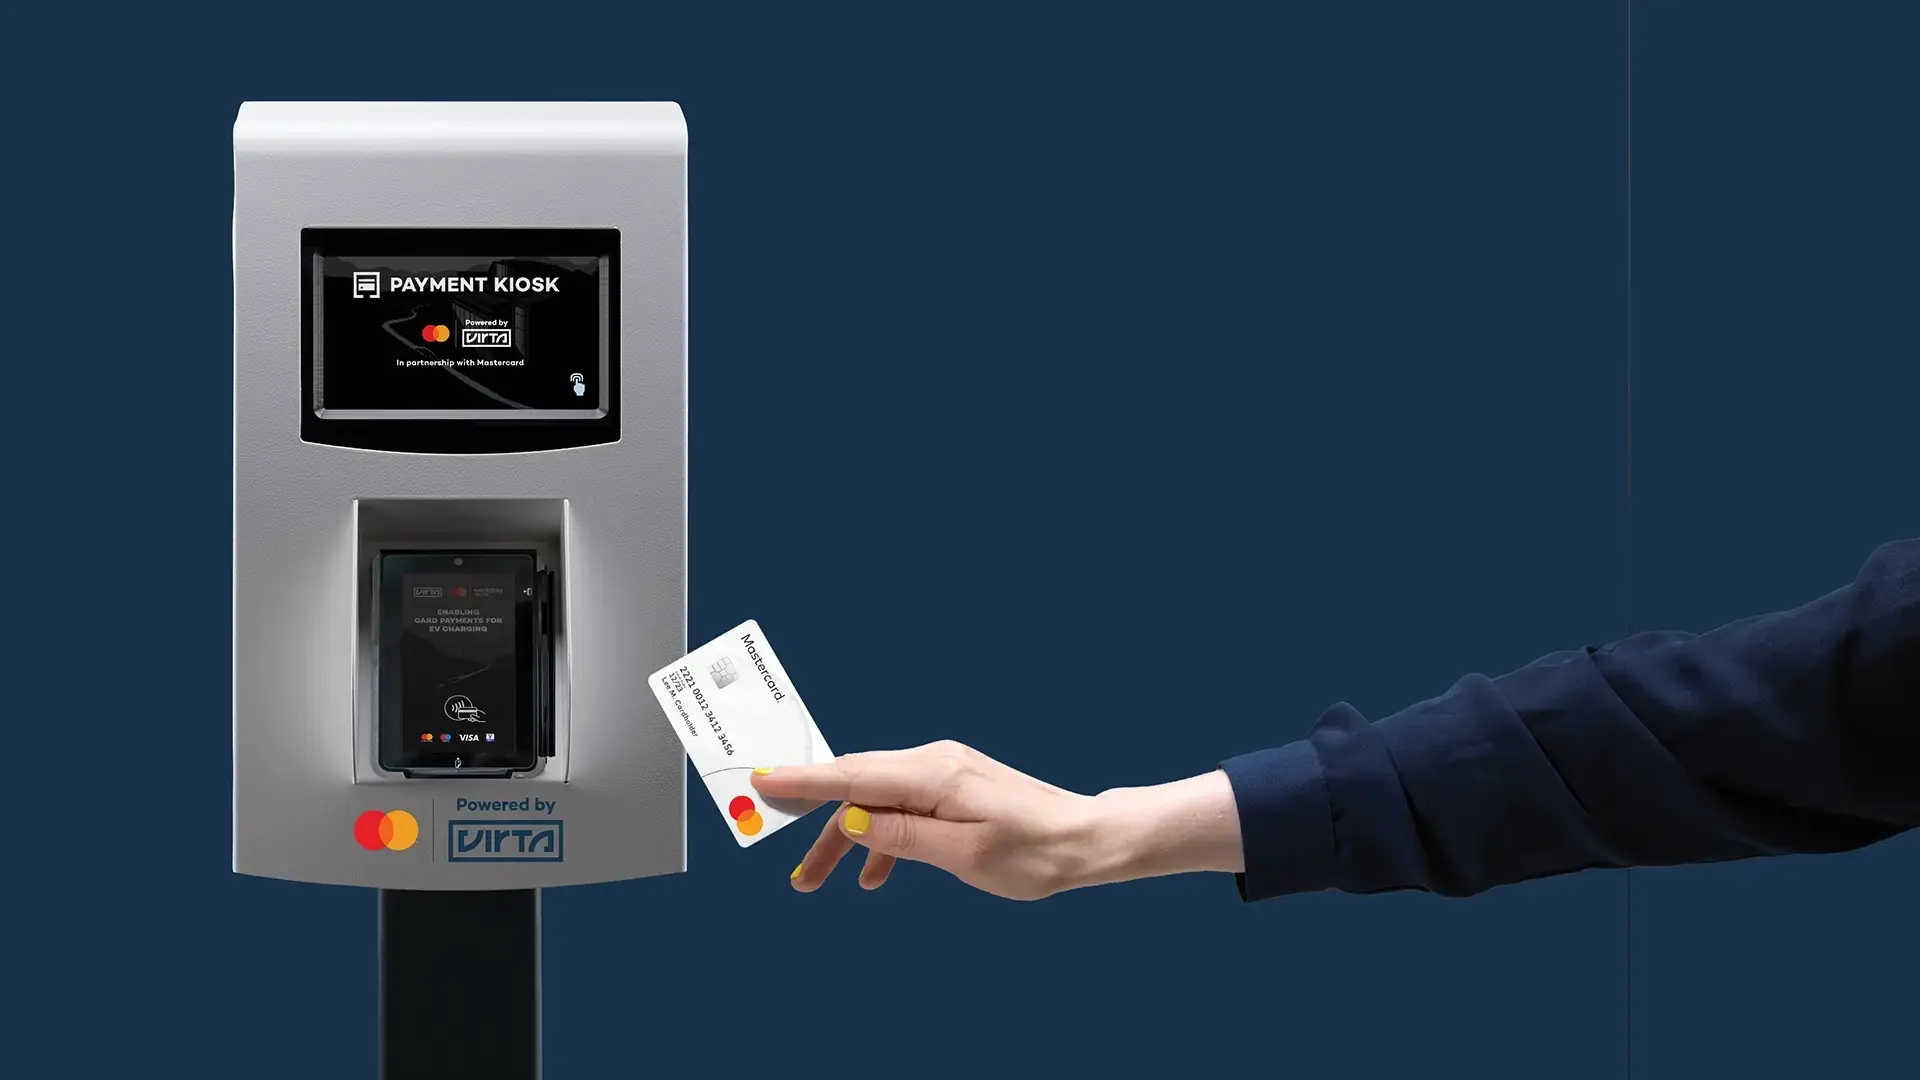 payment-kiosk-hand-with-payment-card-blue-background